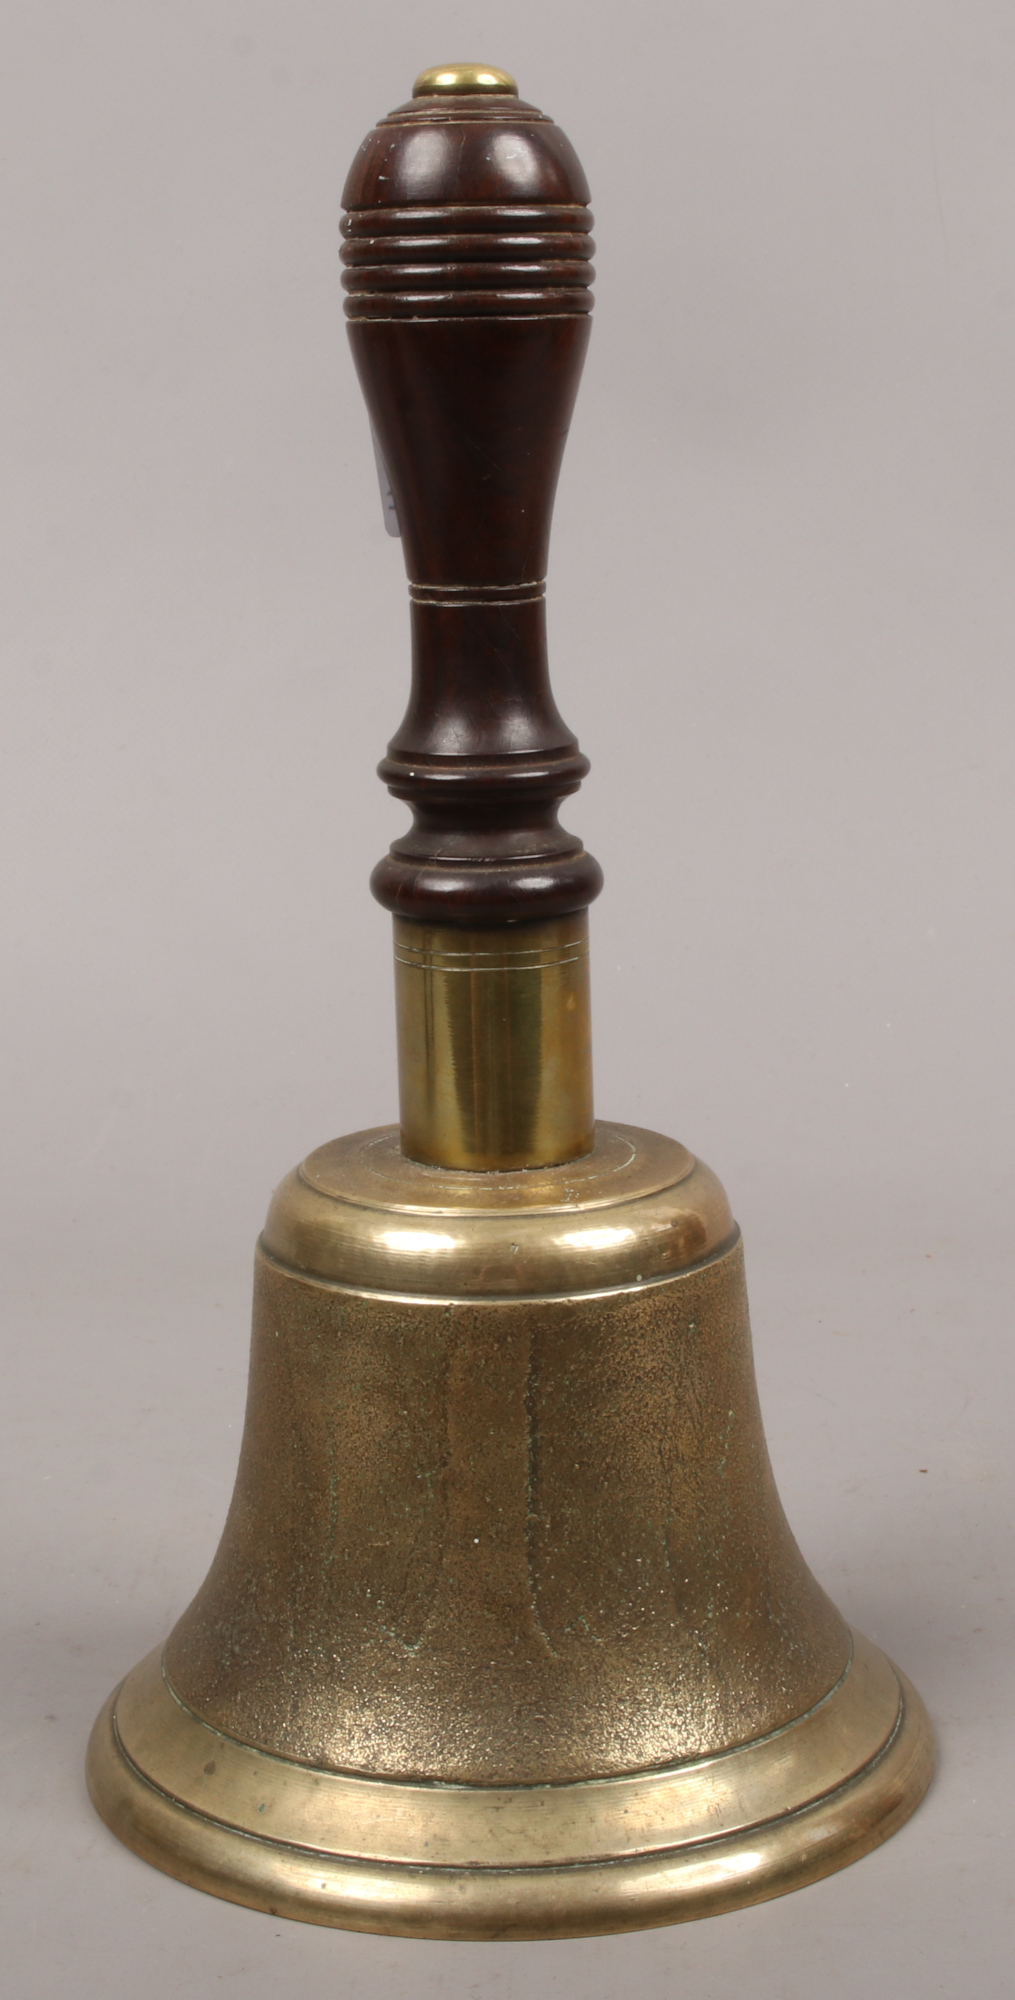 A brass bell with turned wooden handle.